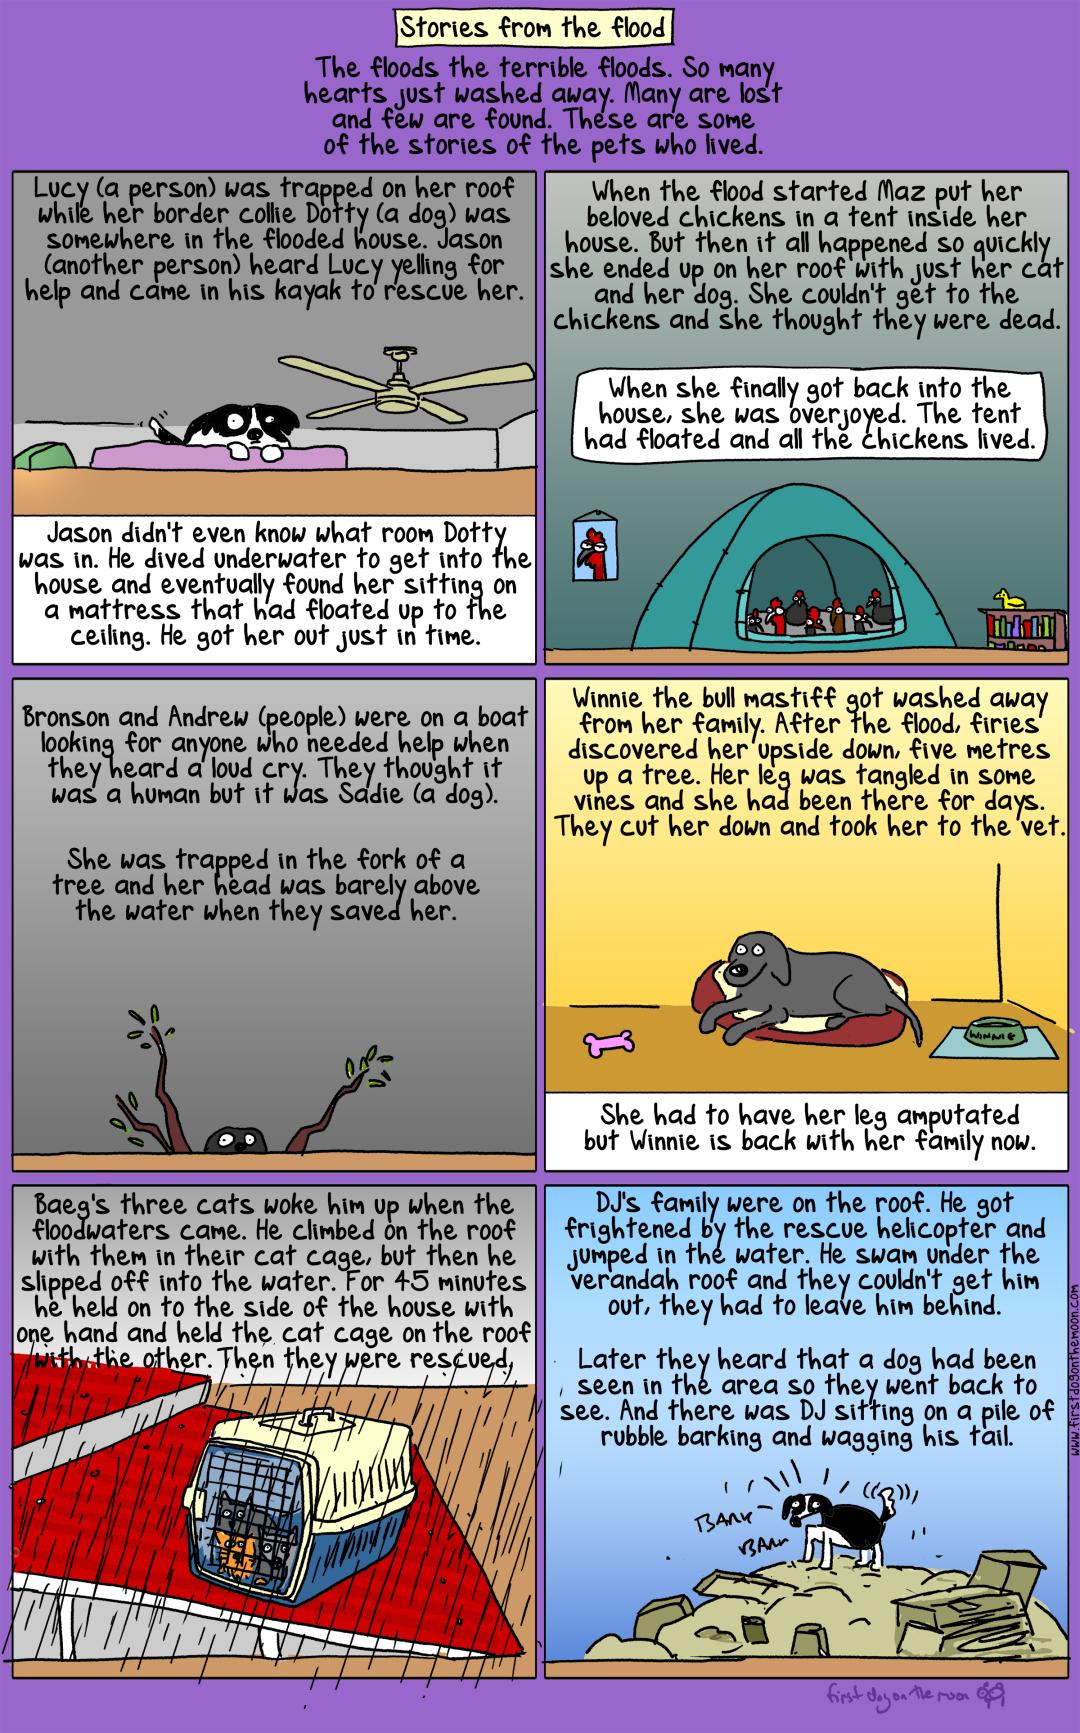 Cartoon called Stories of the Flood by First Dog on the Moon